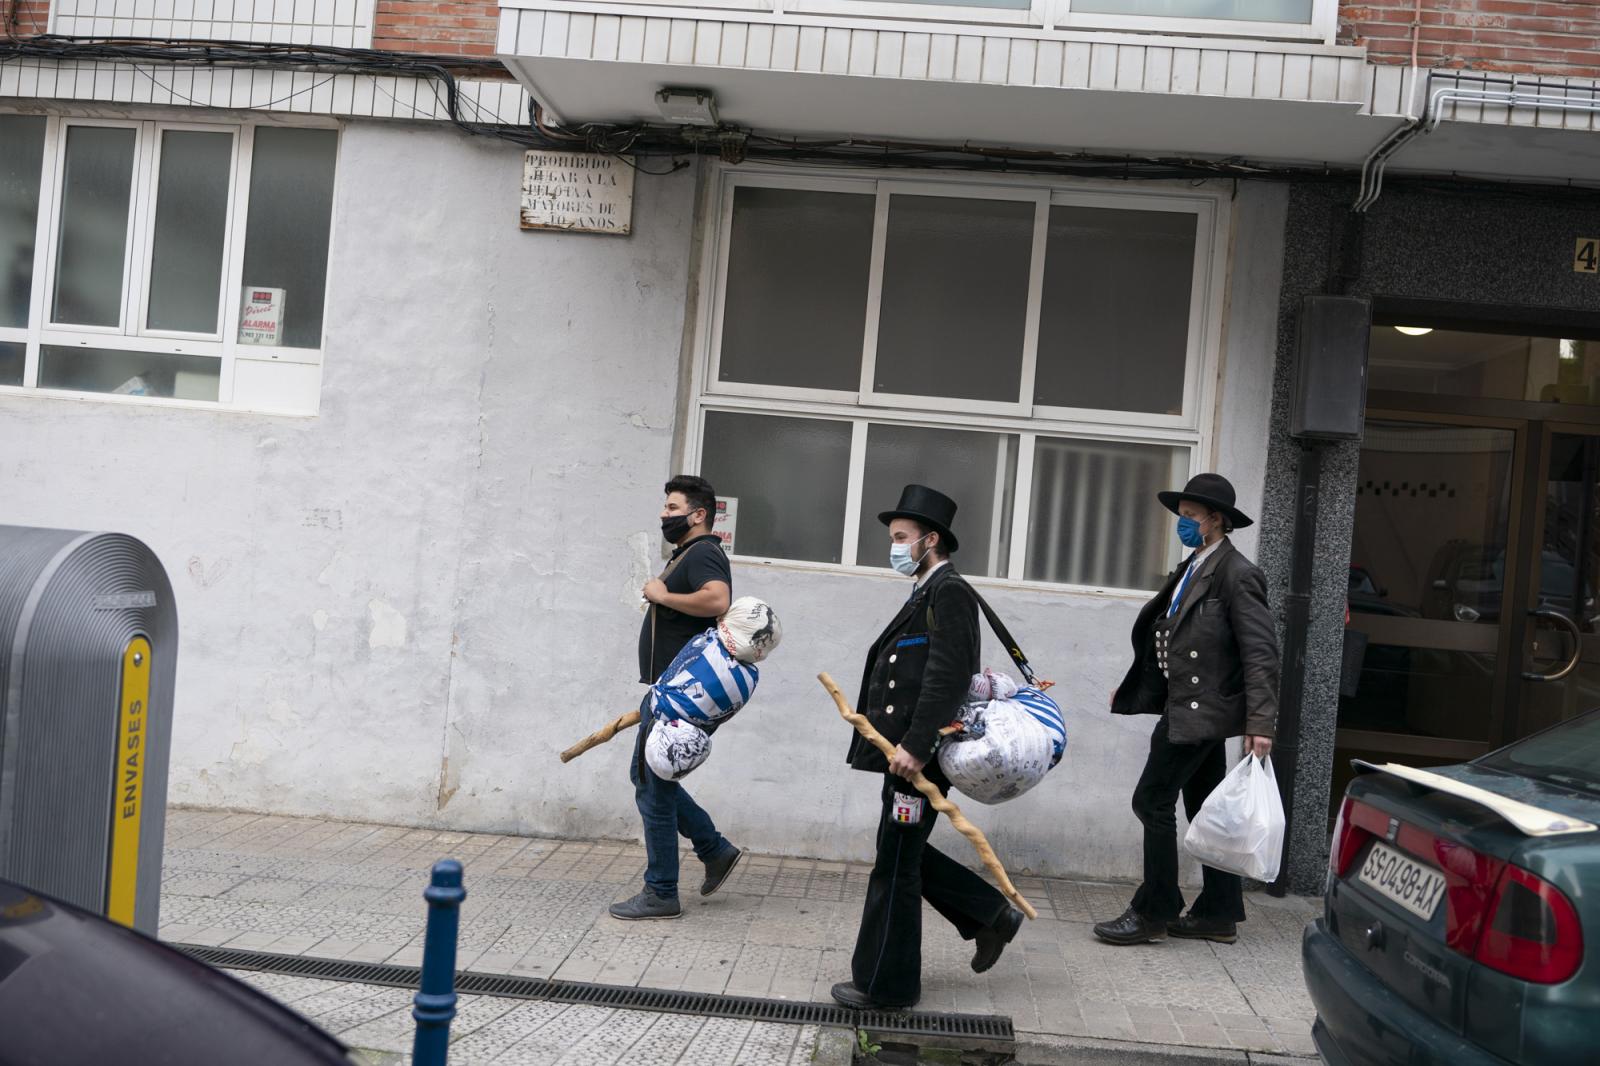   - Ismail (L), Matthias (C) and Ben walk wearing face masks on the street of Santurtzi as they carry...